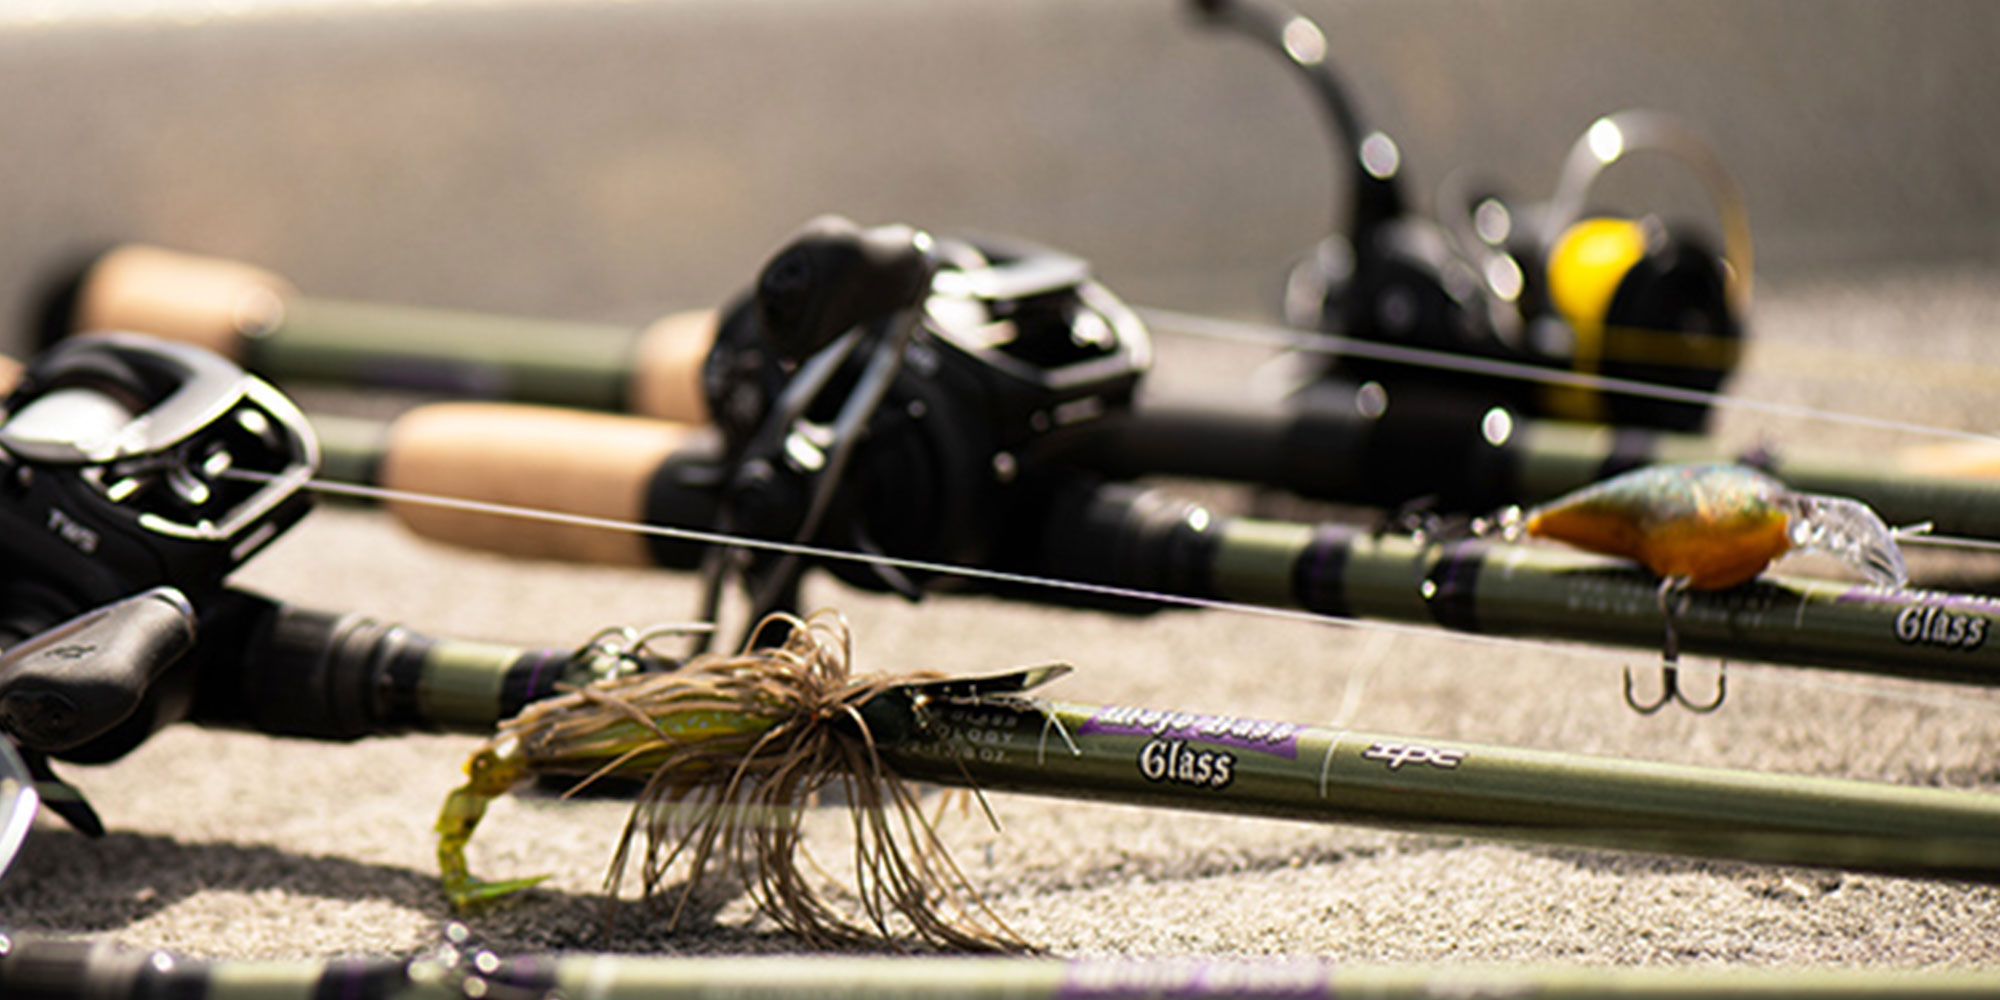 Star Rods Introduces Two New Rods at ICAST 2019, Press Releases